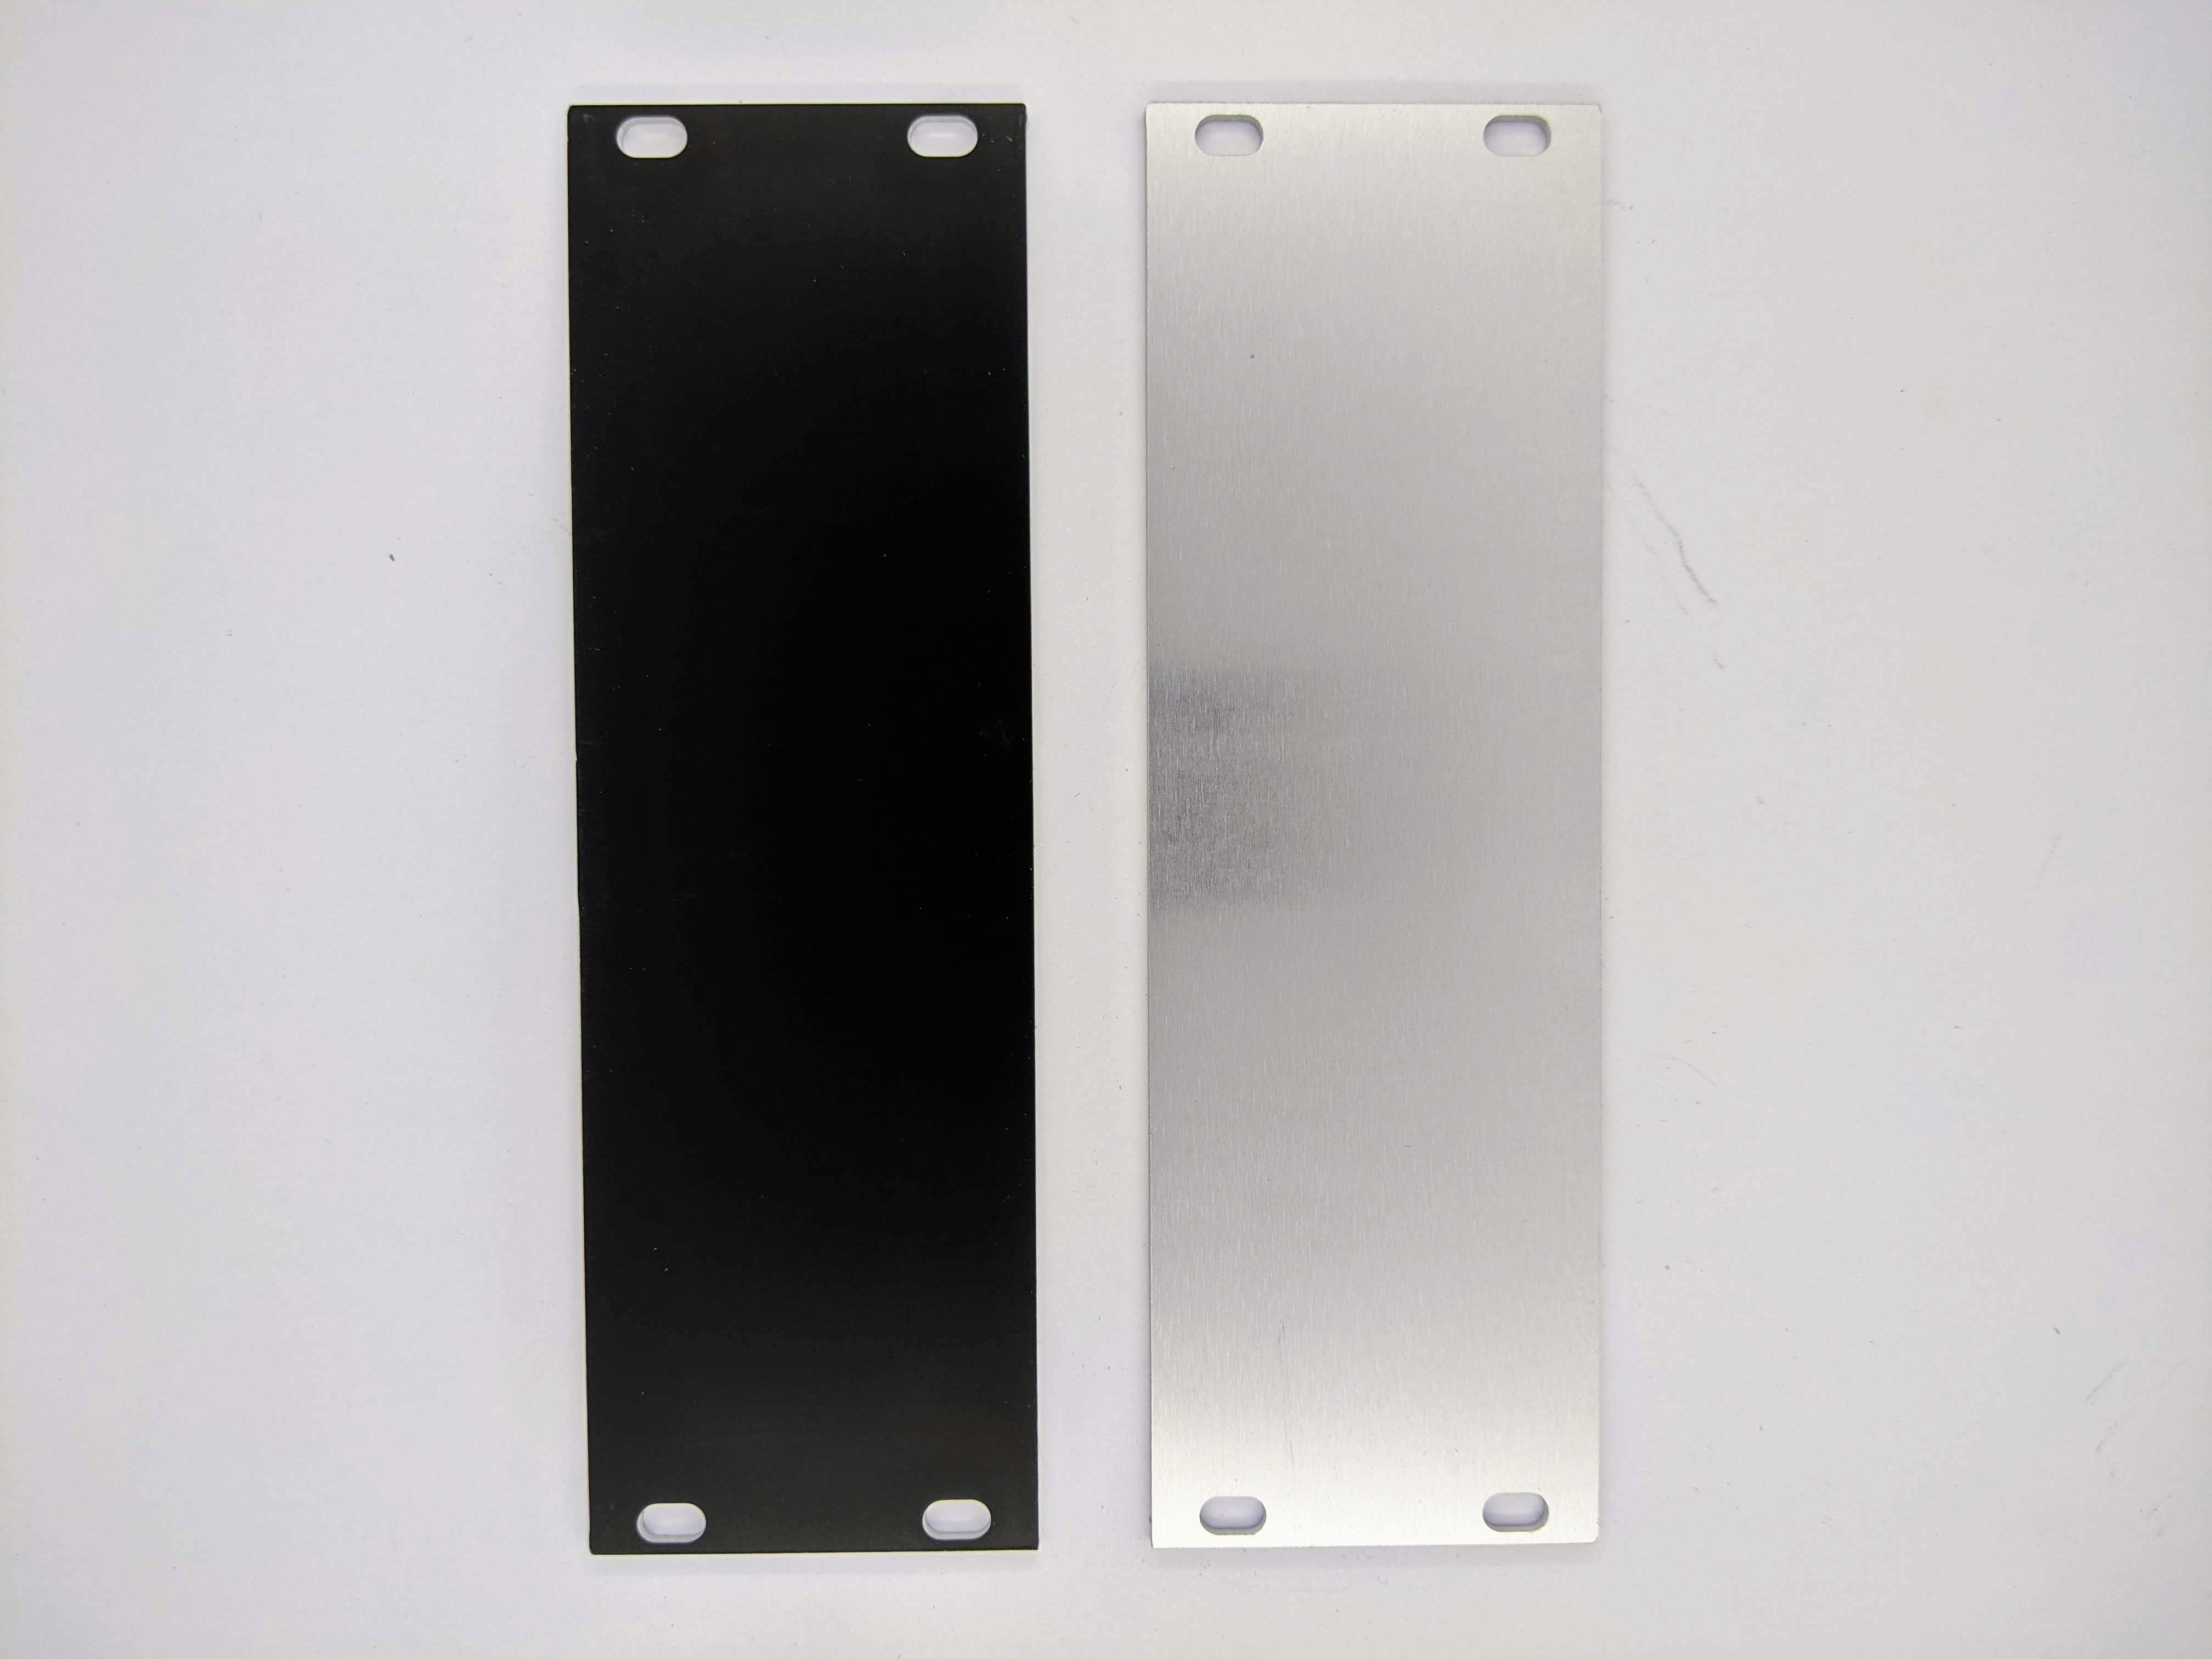 3U 8HP front panel blanking plate DIN41612